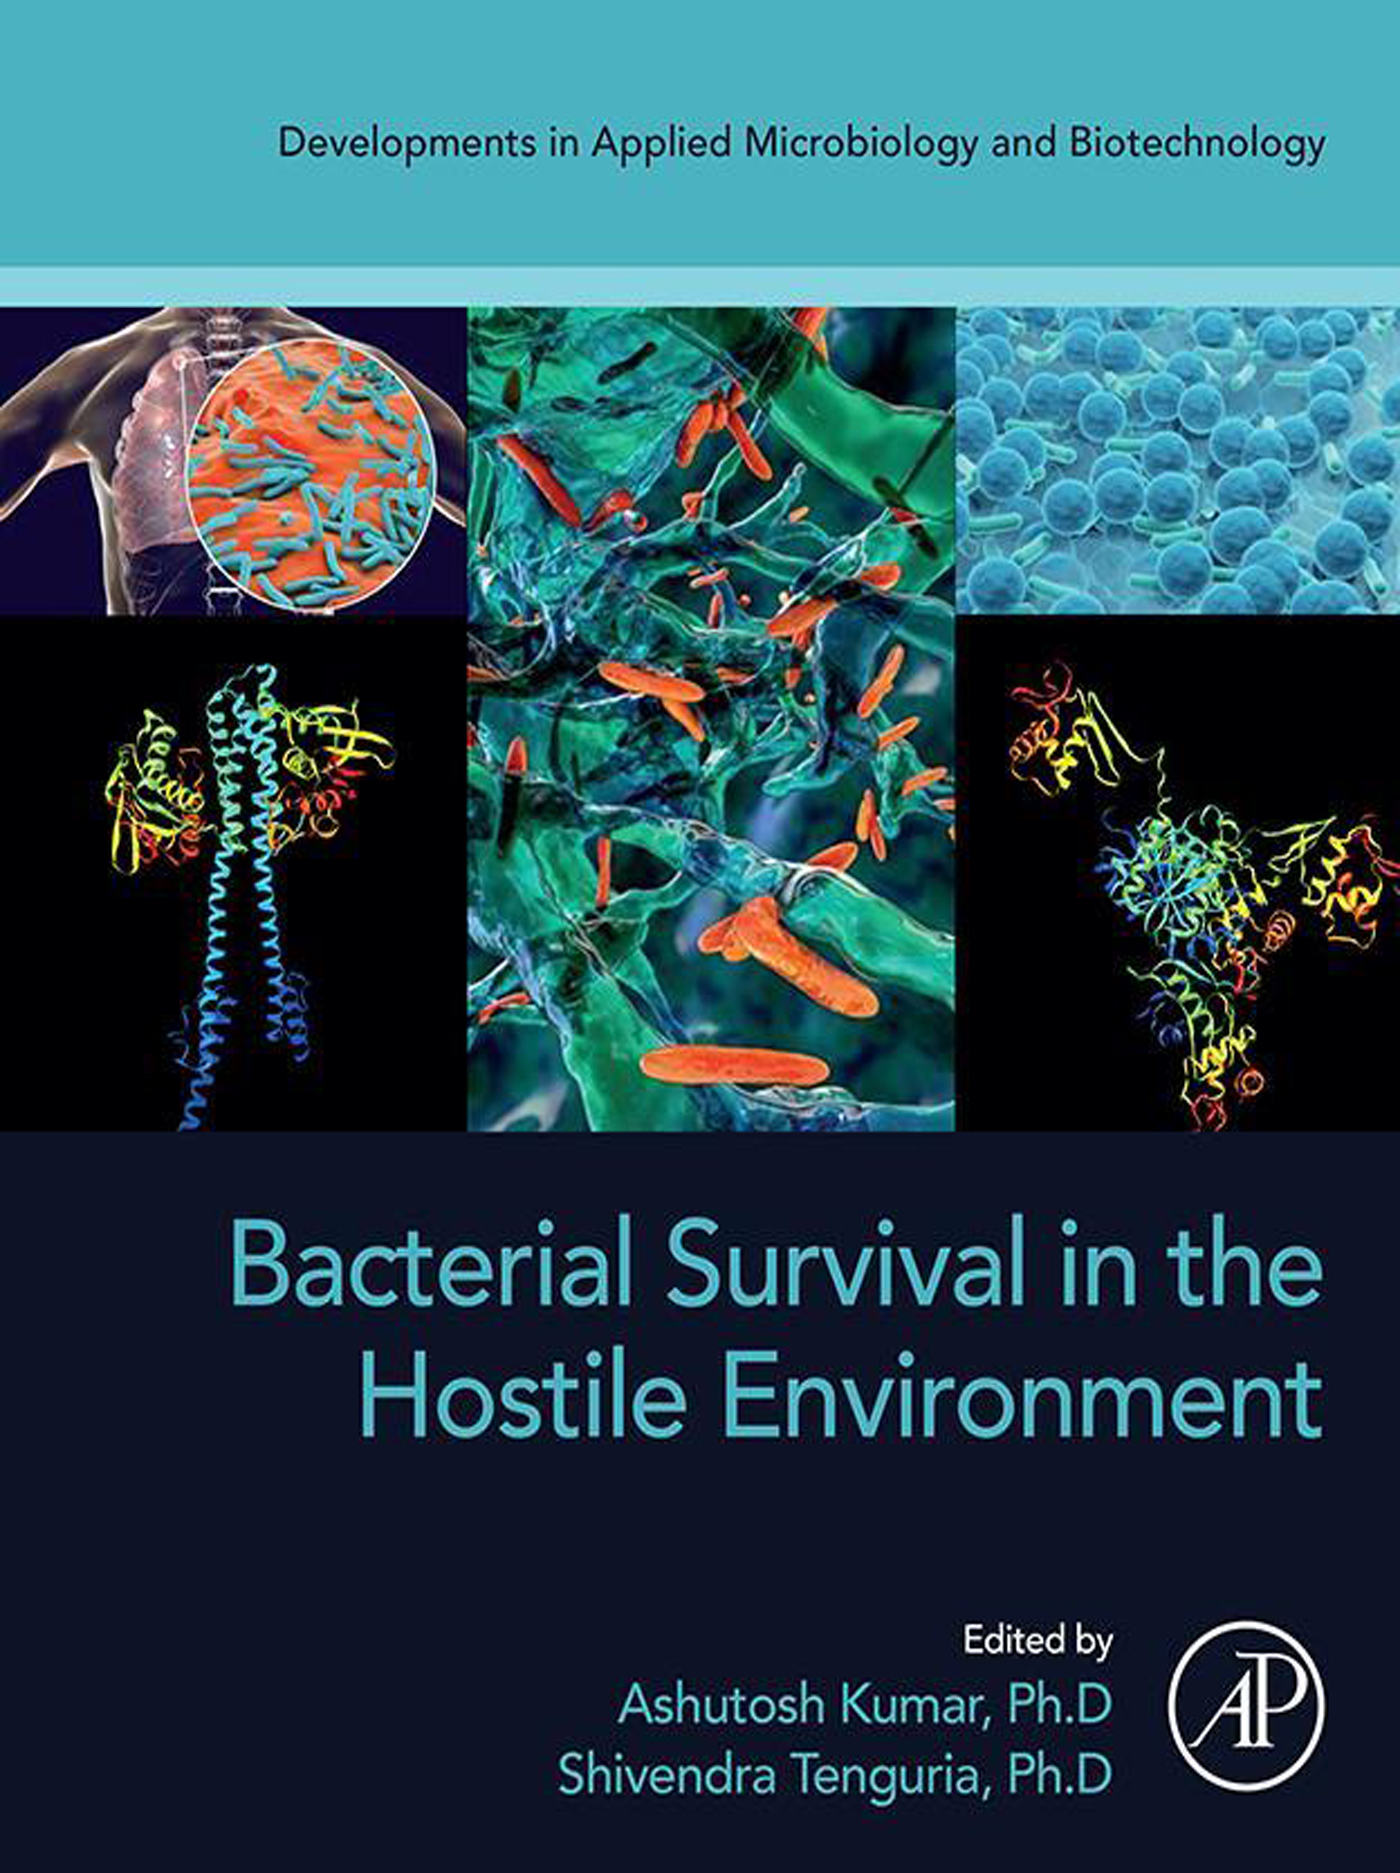 Bacterial Survival in the Hostile Environment